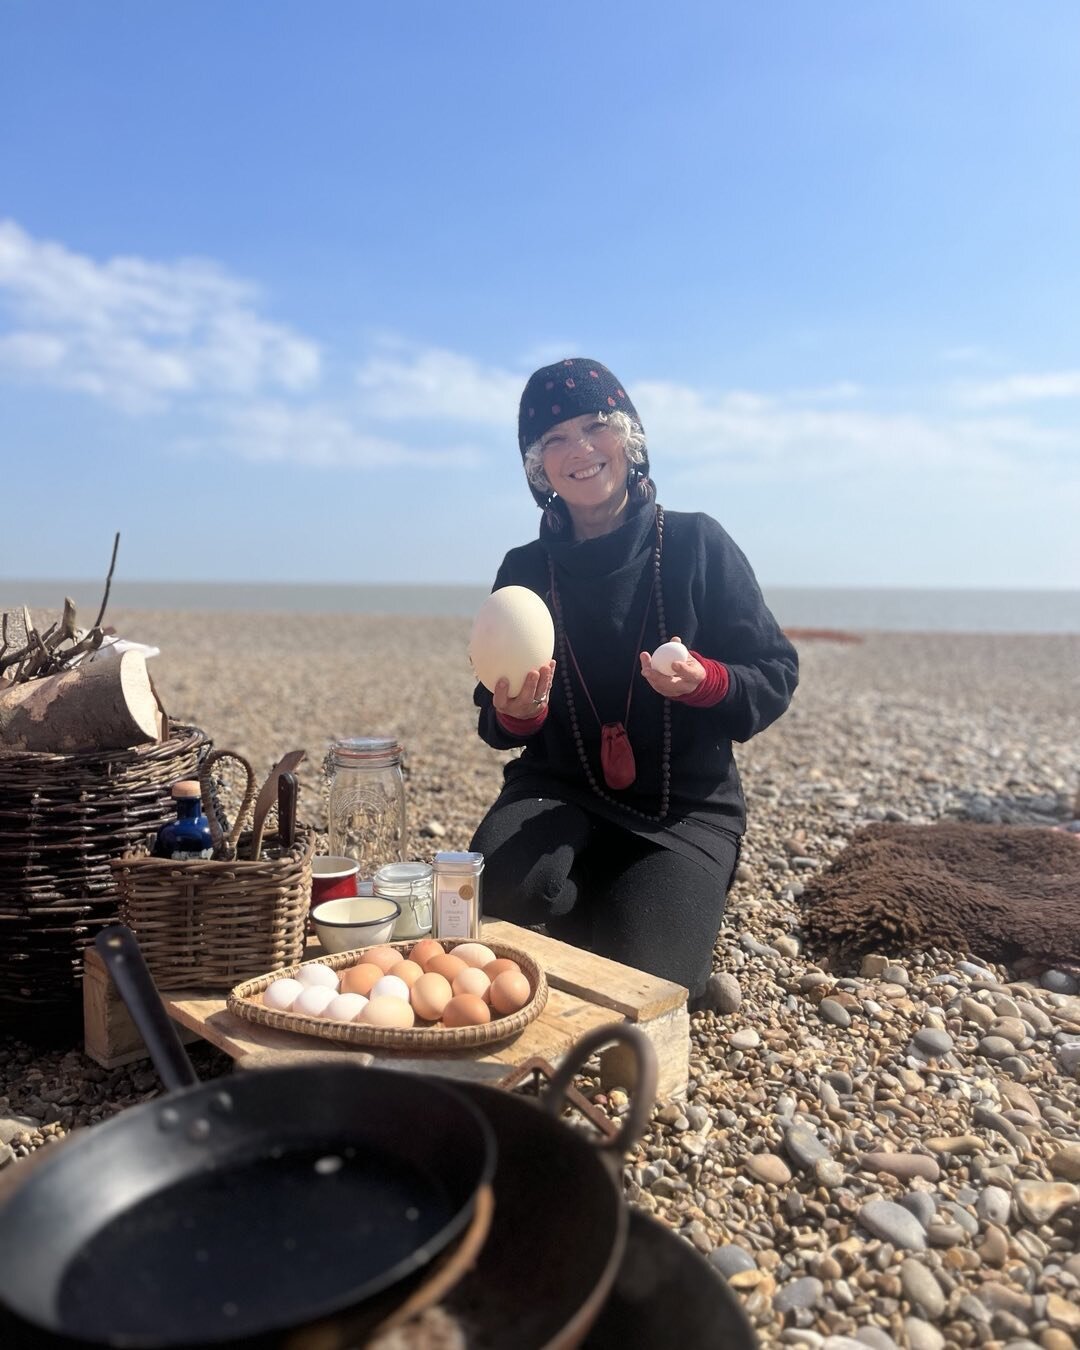 Miche Fabre Lewin cooks her Ecological Omelette for Lookout Cookout. Tasting today 12 - 2pm at the Aldeburgh Beach Lookout @caroline.wiseman.16 @studiofabrehardy @davidbaldry  #art  #food